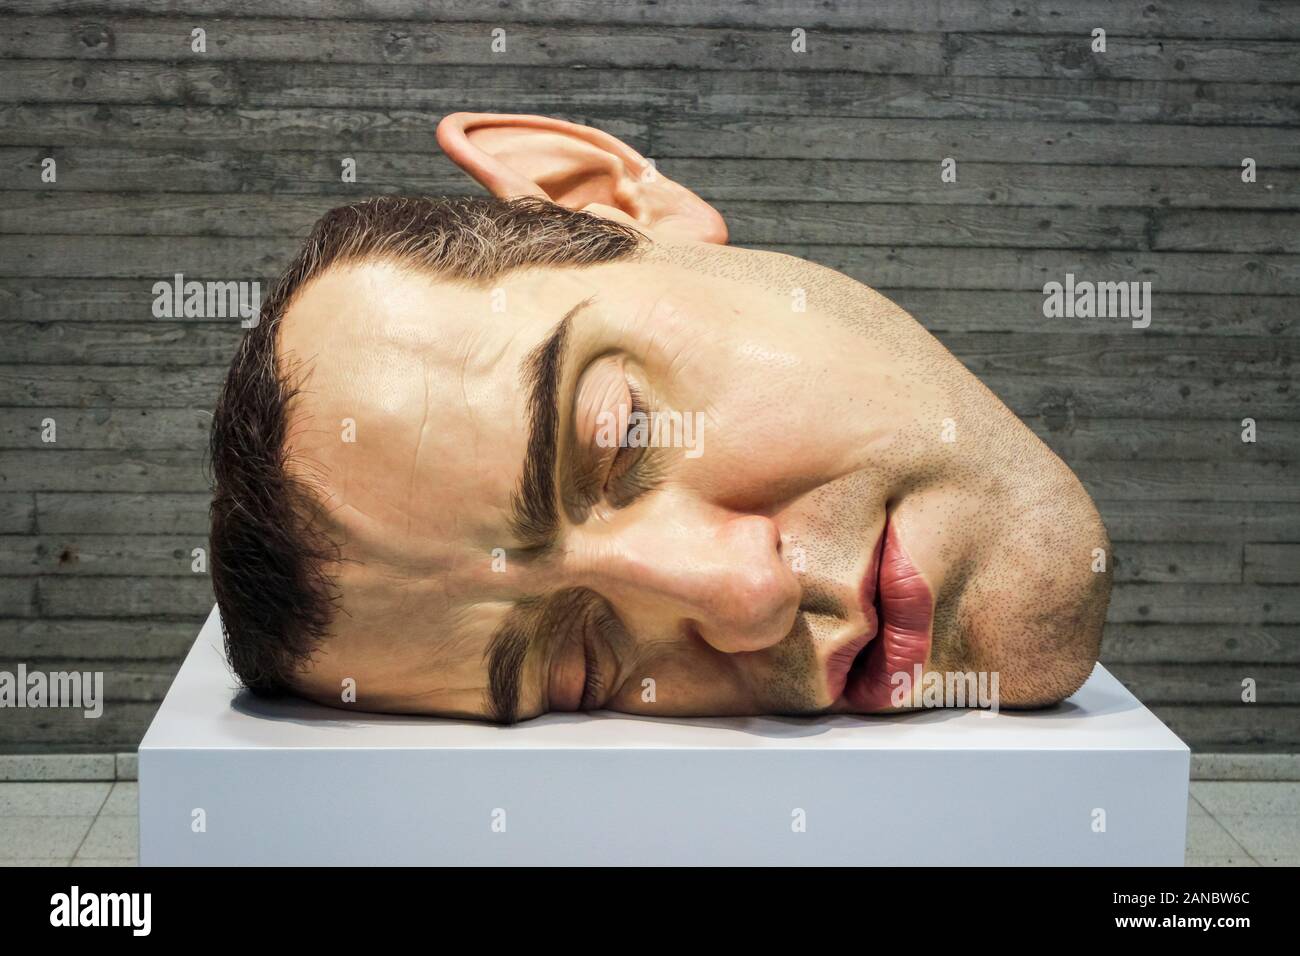 Mask 2, hyperrealistic self-portrait sculpture by Ron Mueck, at Sara Hildén Art in Tampere, Finland Photo - Alamy